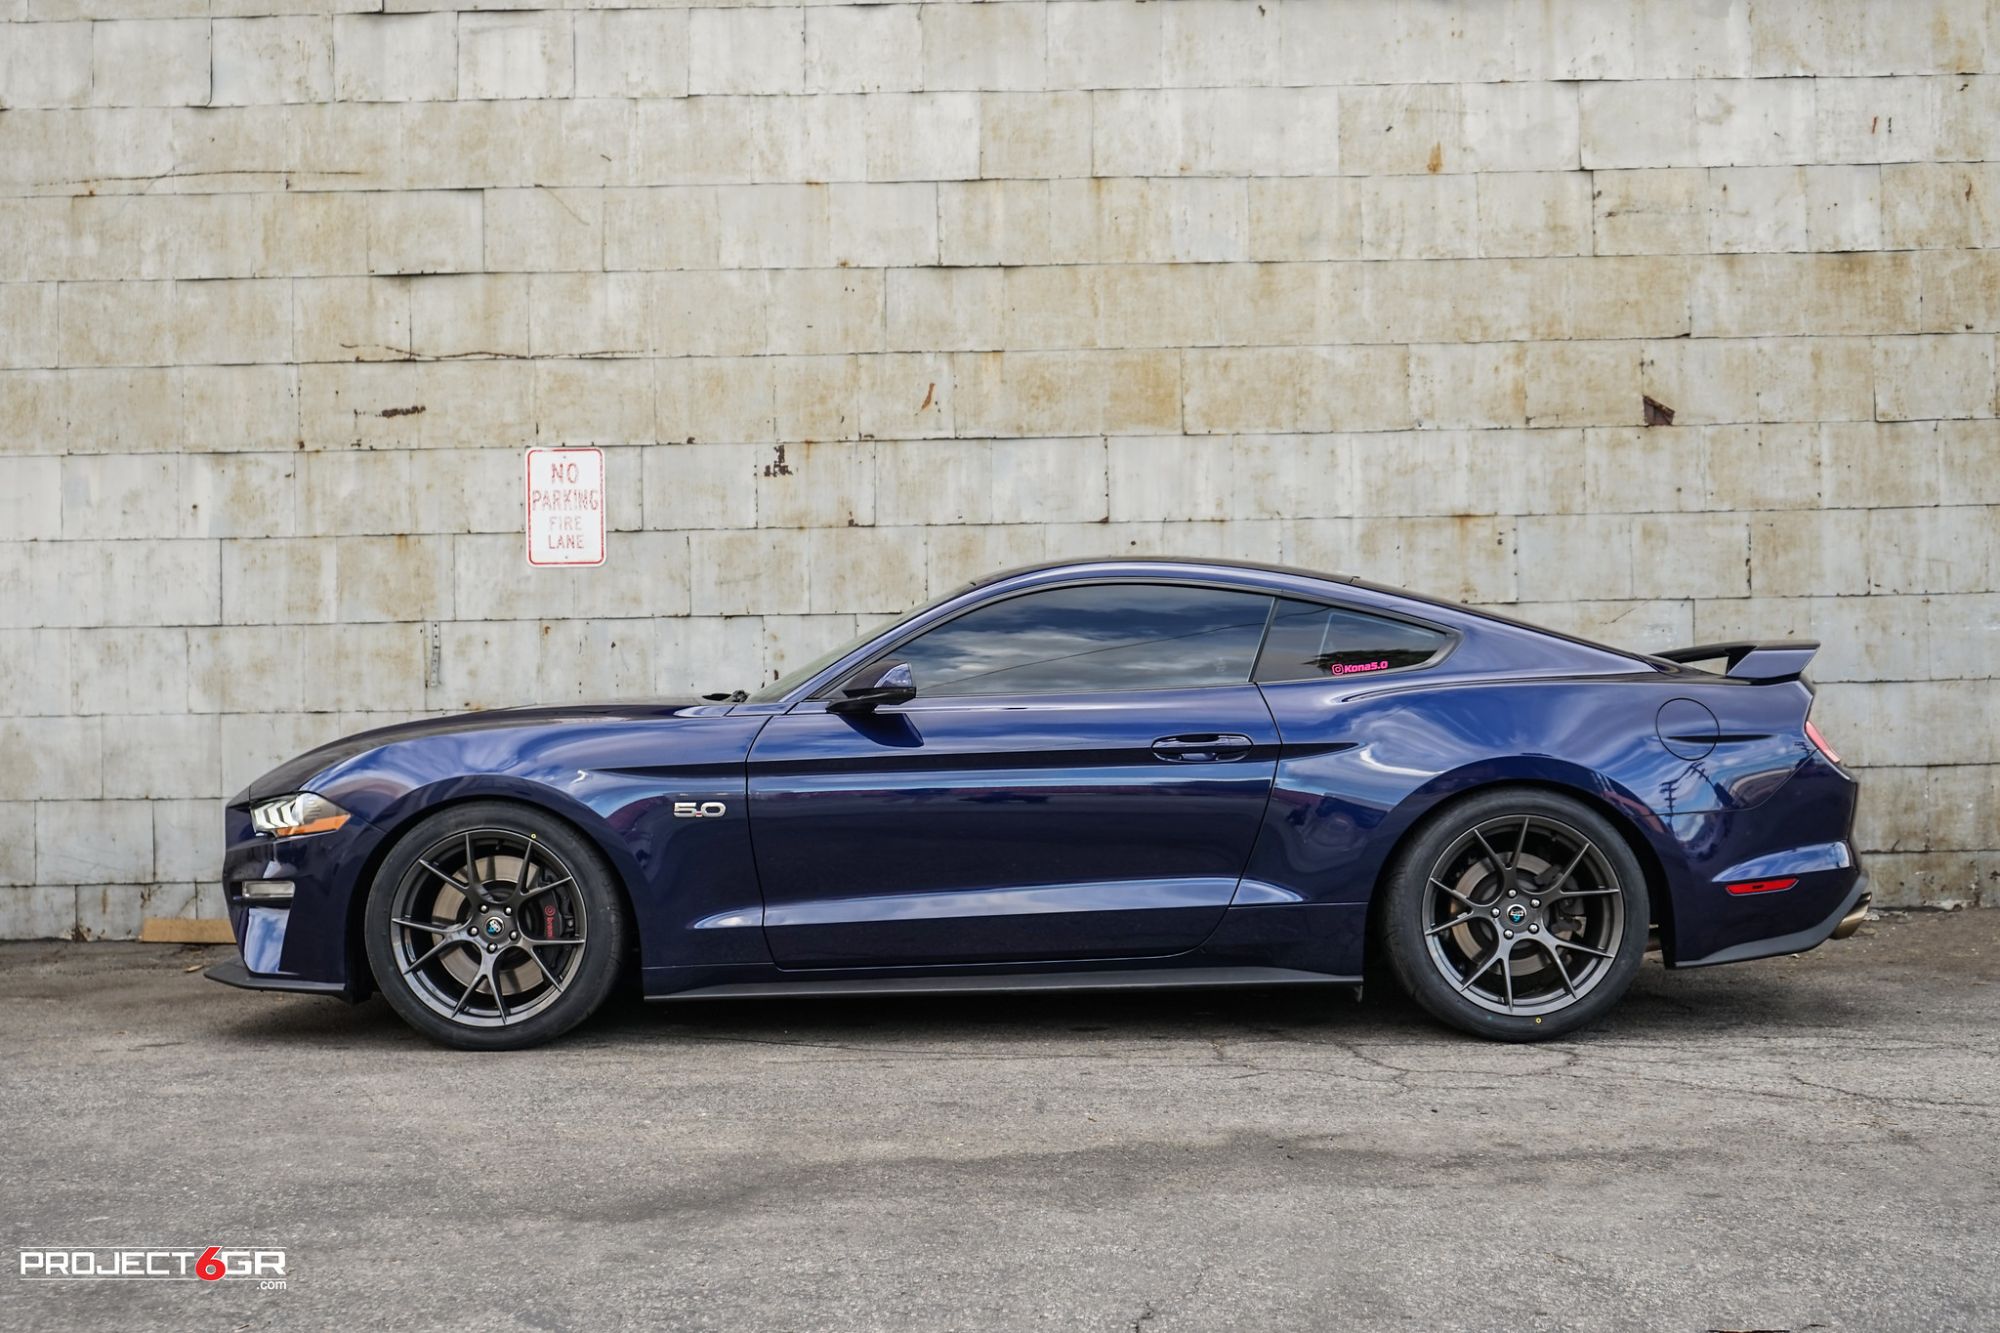 ford-mustang-gt-with-project6gr-ten-wheels-3-1.jpg